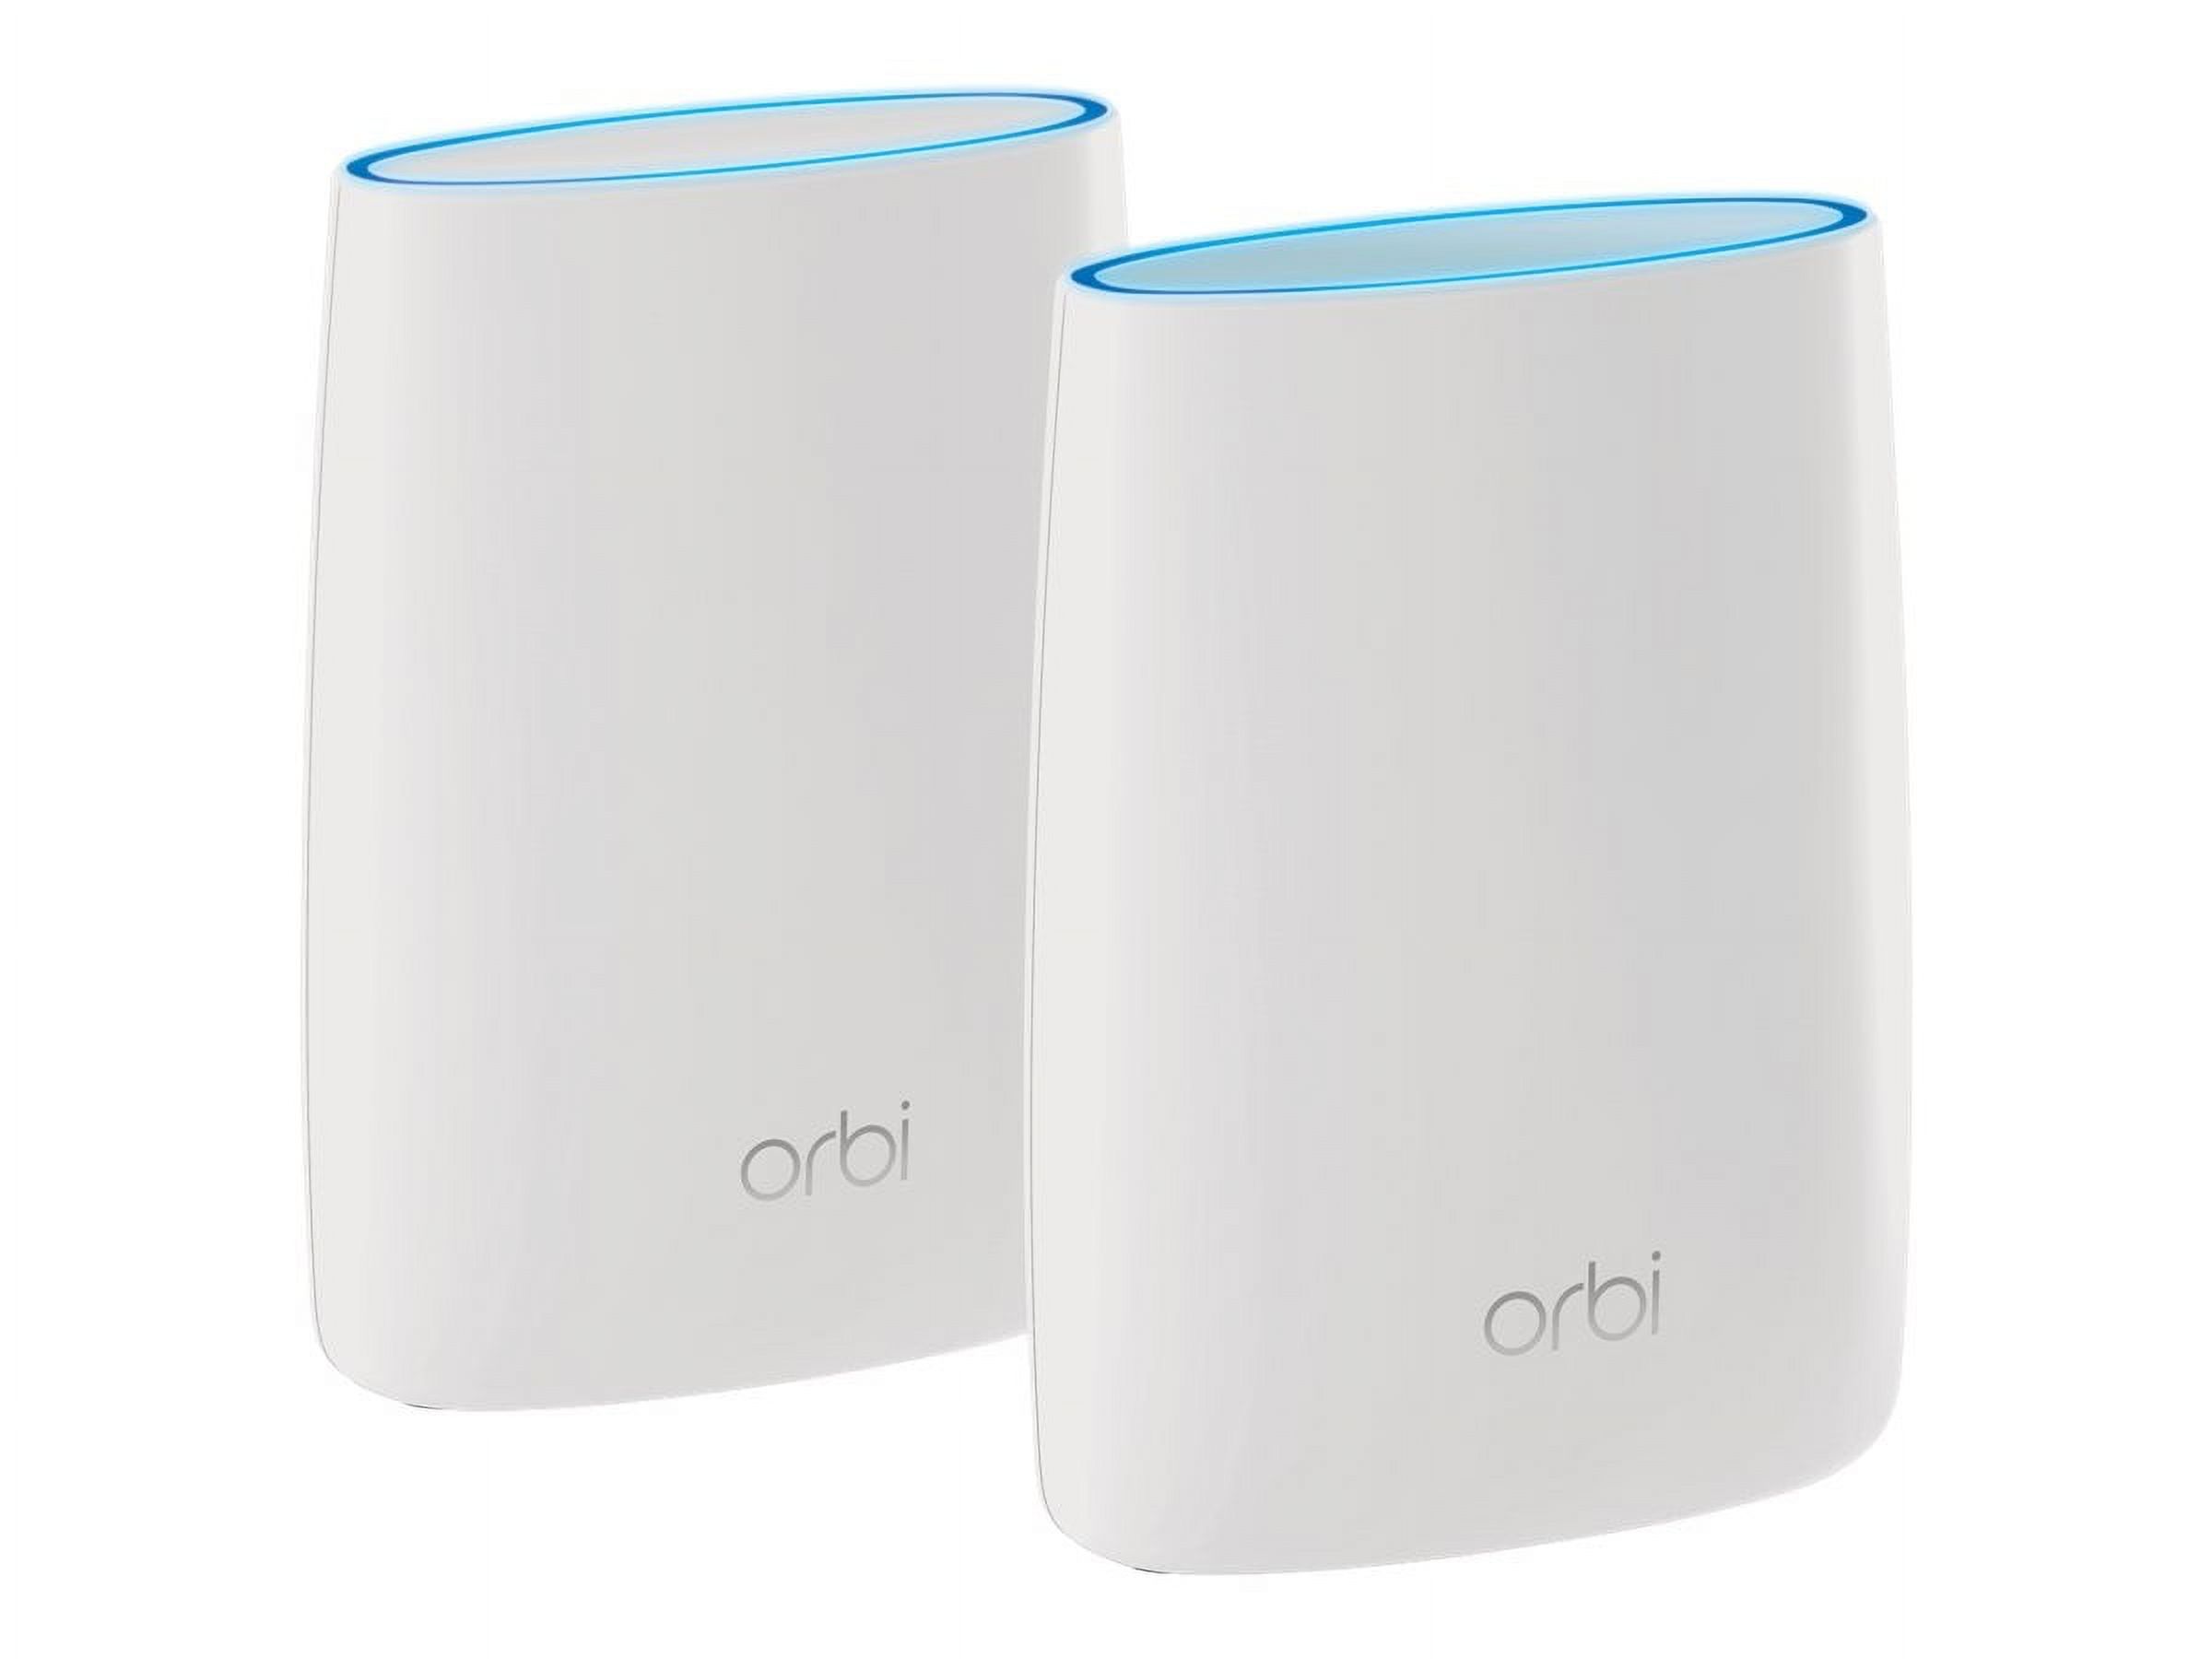 NETGEAR - Orbi AC3000 Tri-Band Mesh WiFi System with Router + 1 Satellite Extender, 3Gbps (RBK50) - image 1 of 11